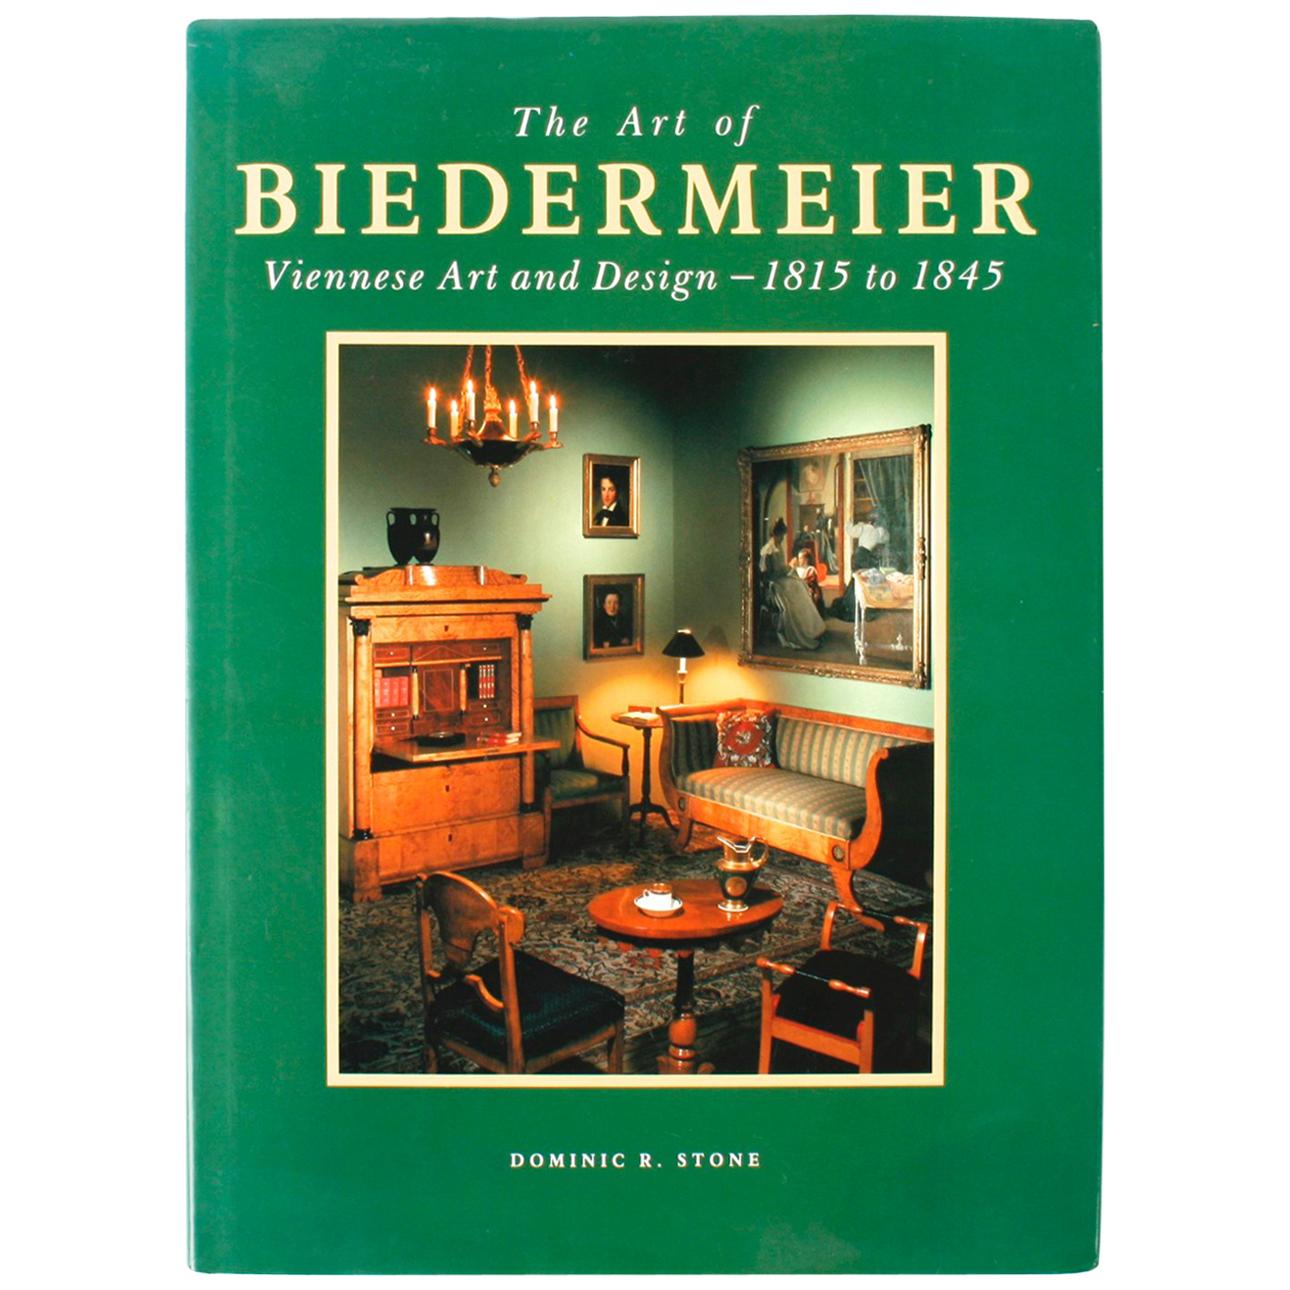 Art of Biedermeier Viennese Art and Design by Dominic R Stone, First Edition